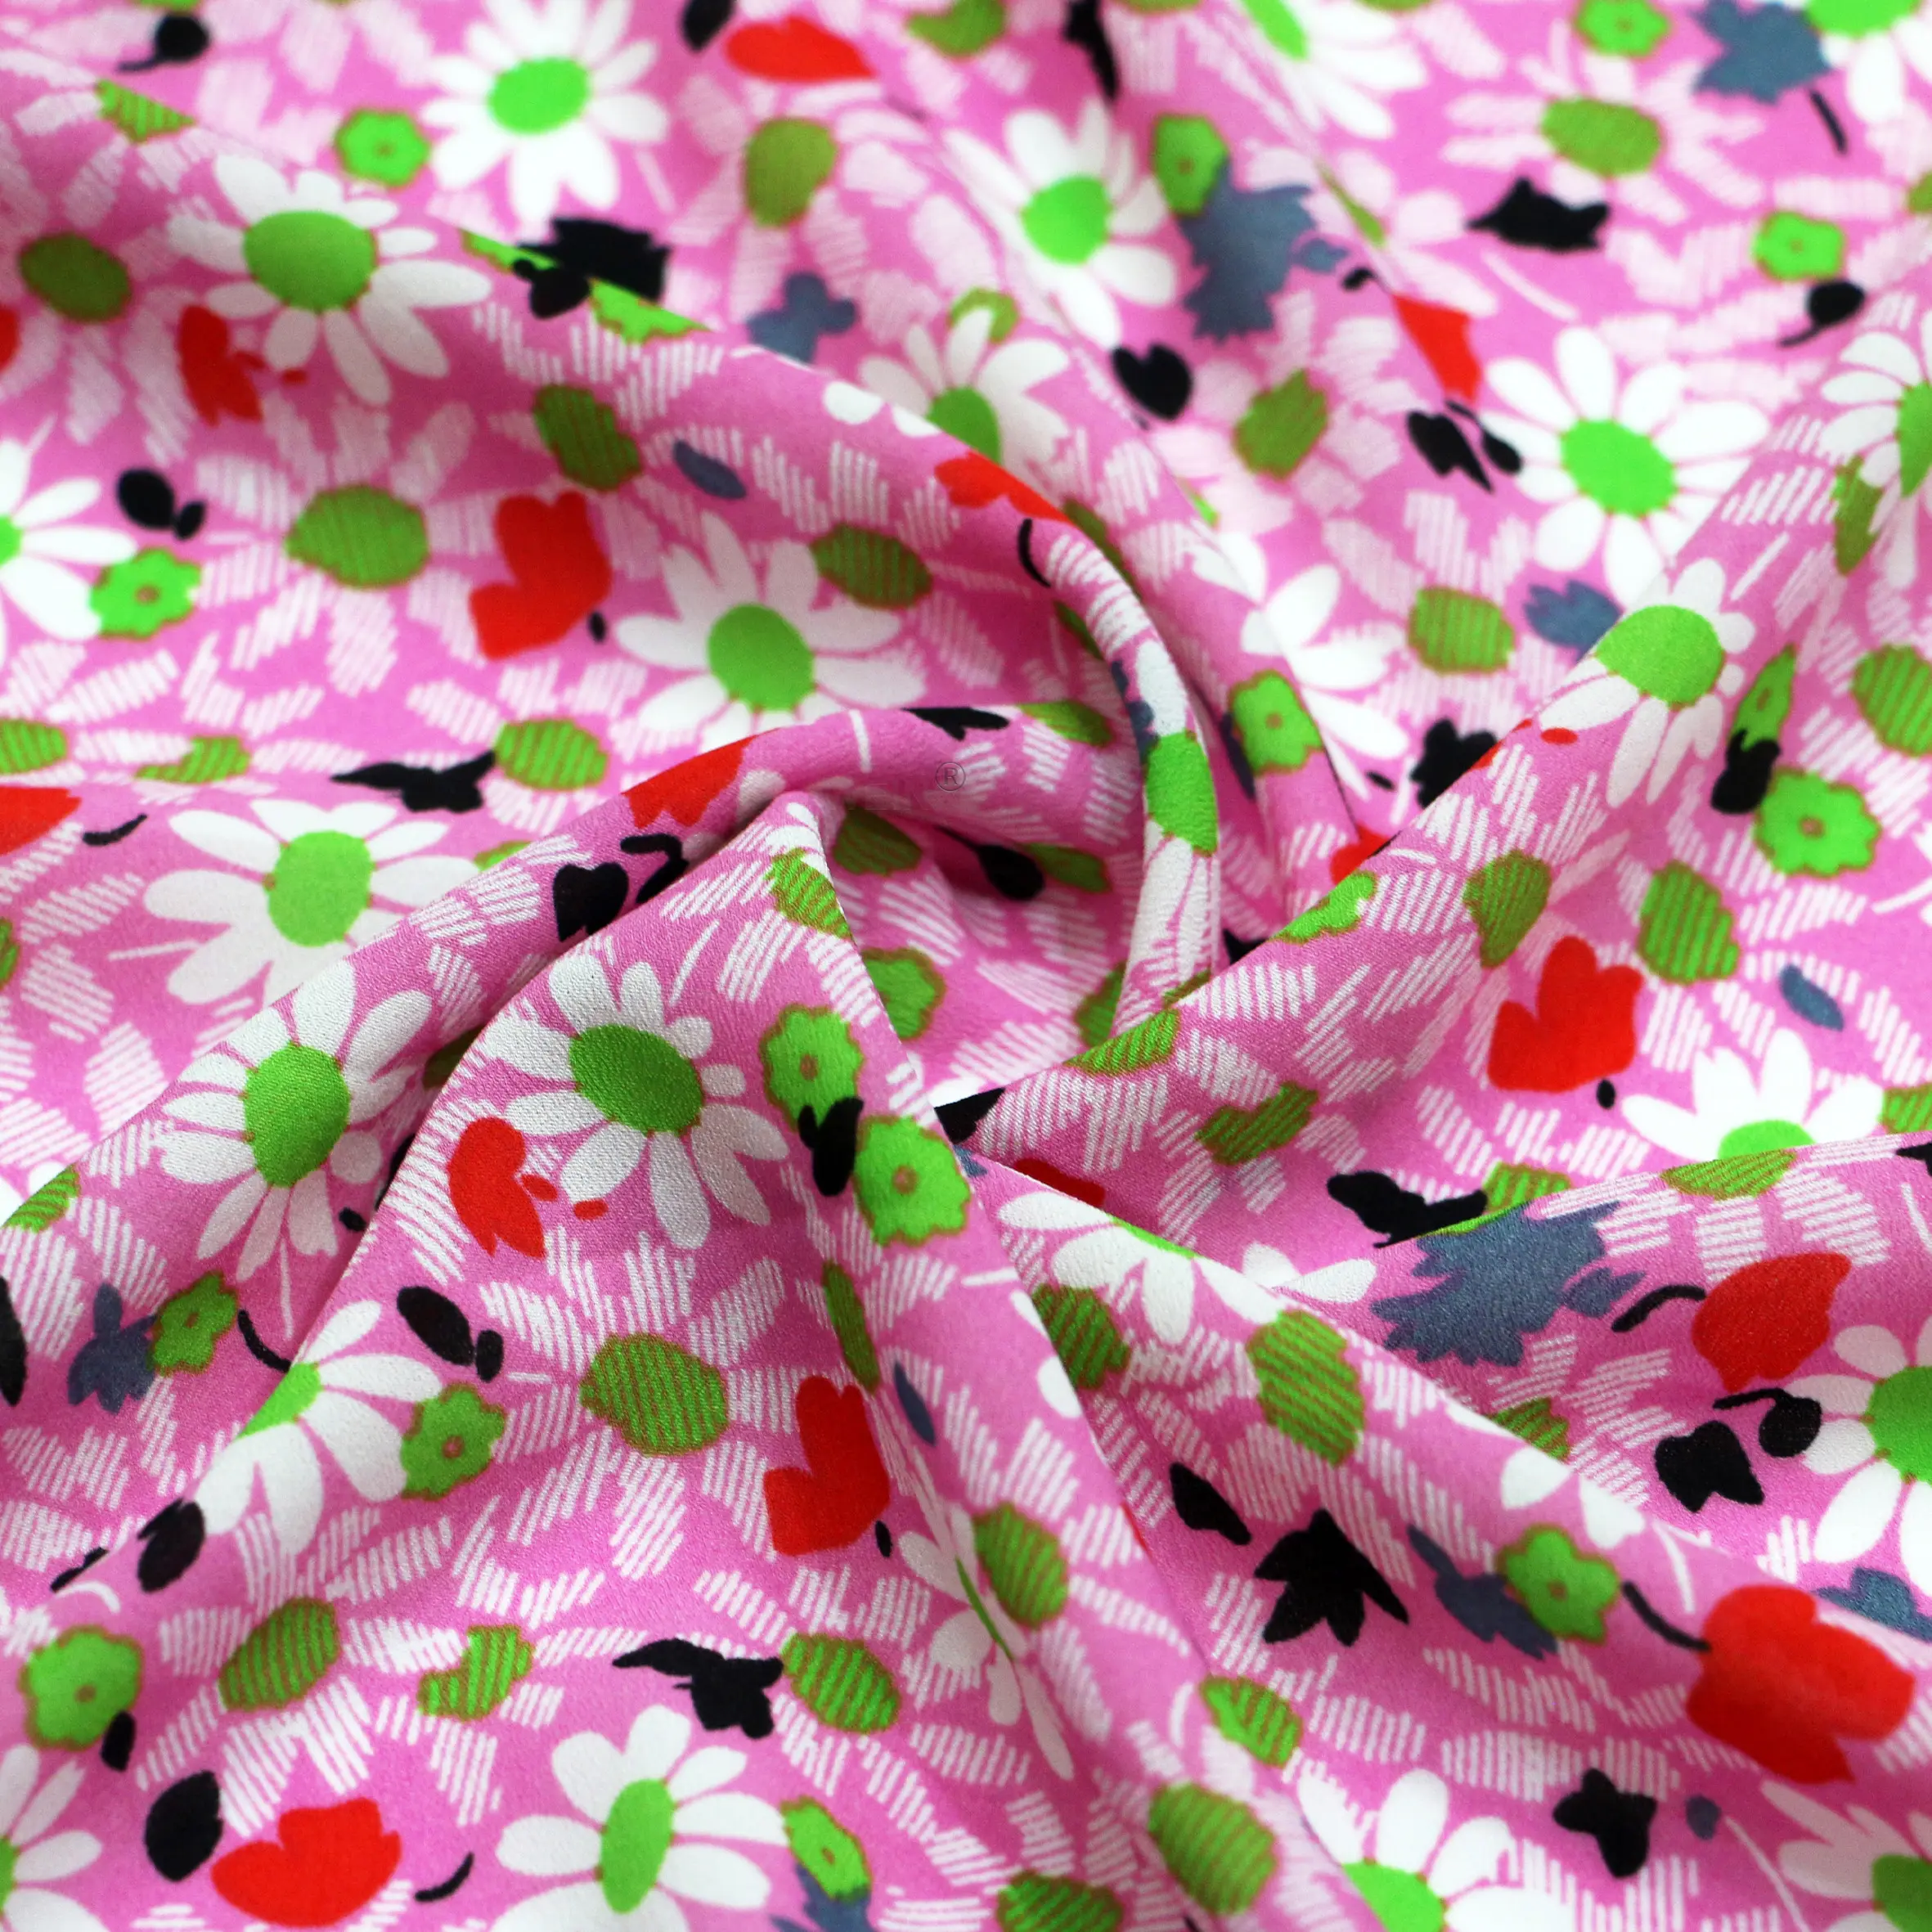 WI-B06 Fancy colorful daisy design soft faille crepe fabric round screen printing for fashion dress